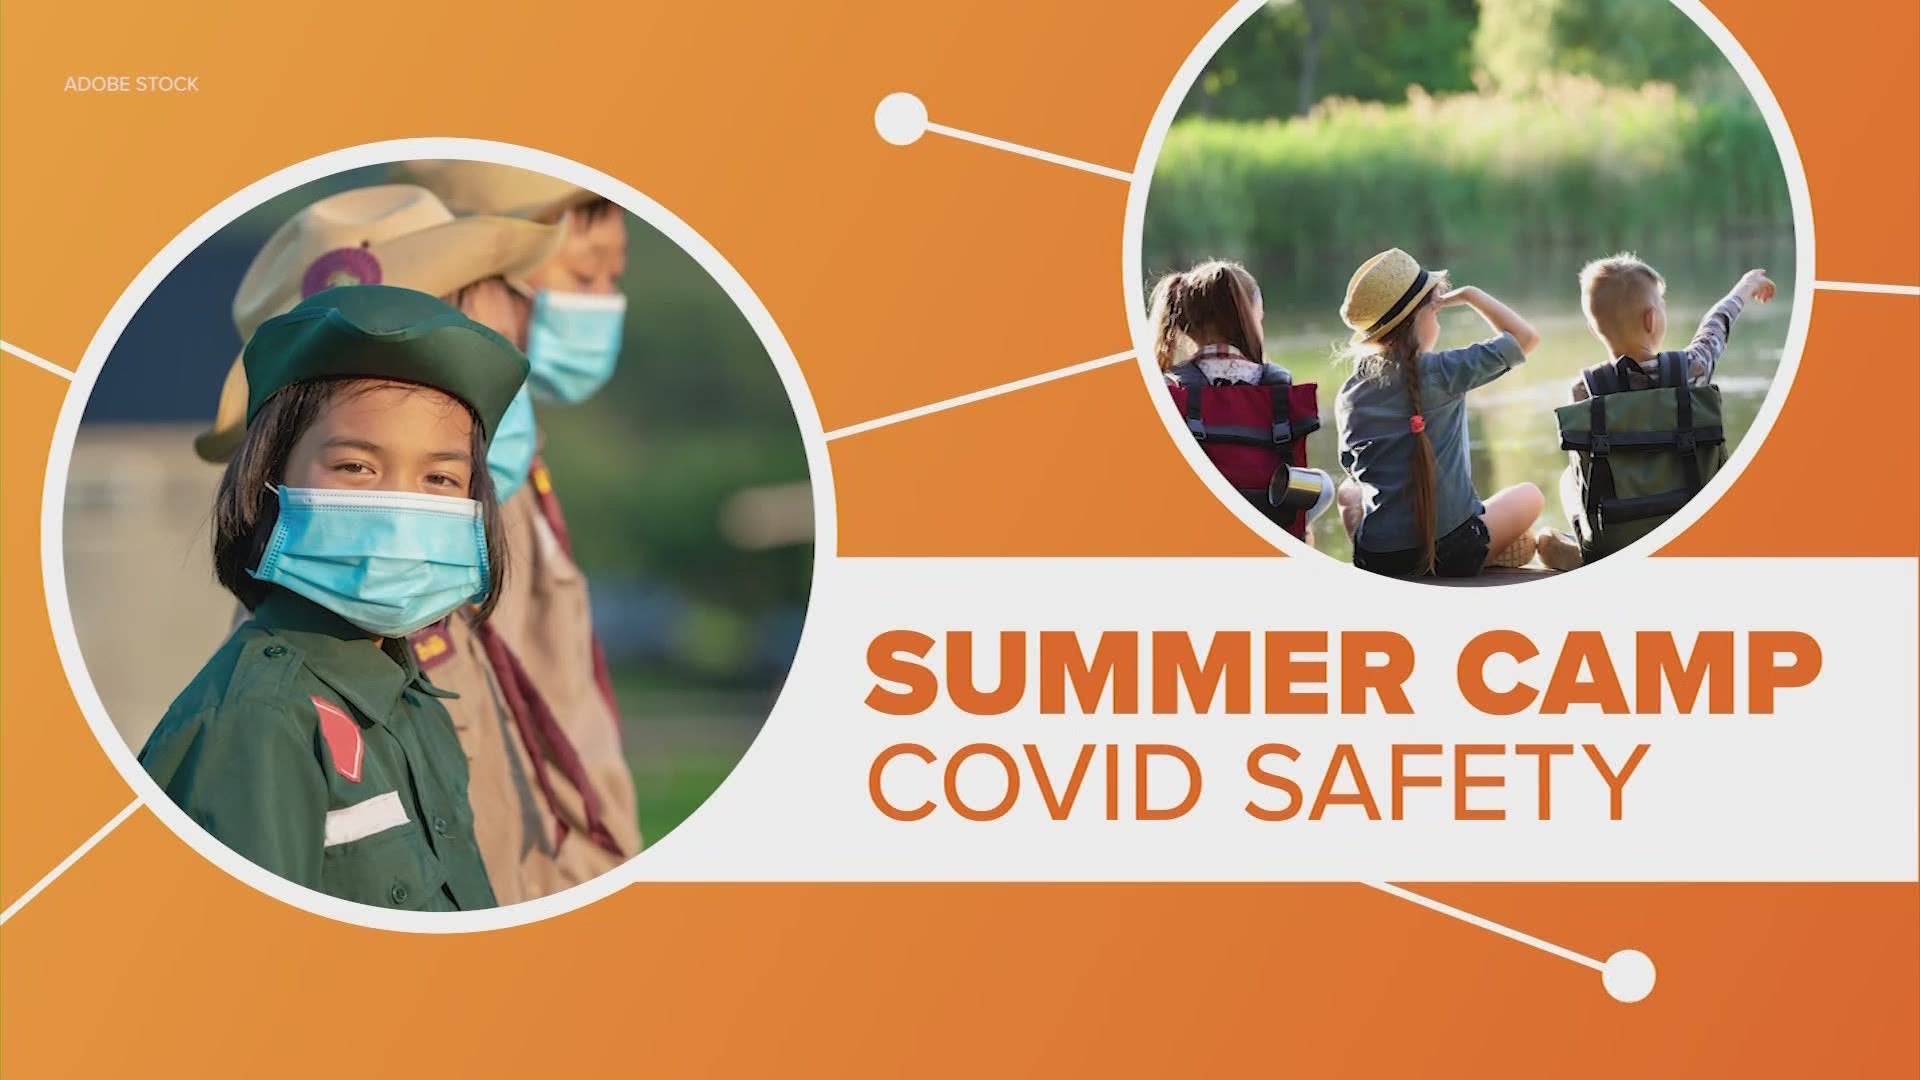 Summer is just around the corner and in the before times that meant summer camp for kids. So how safe is it for some fun in the sun this year? Let’s connect the dots